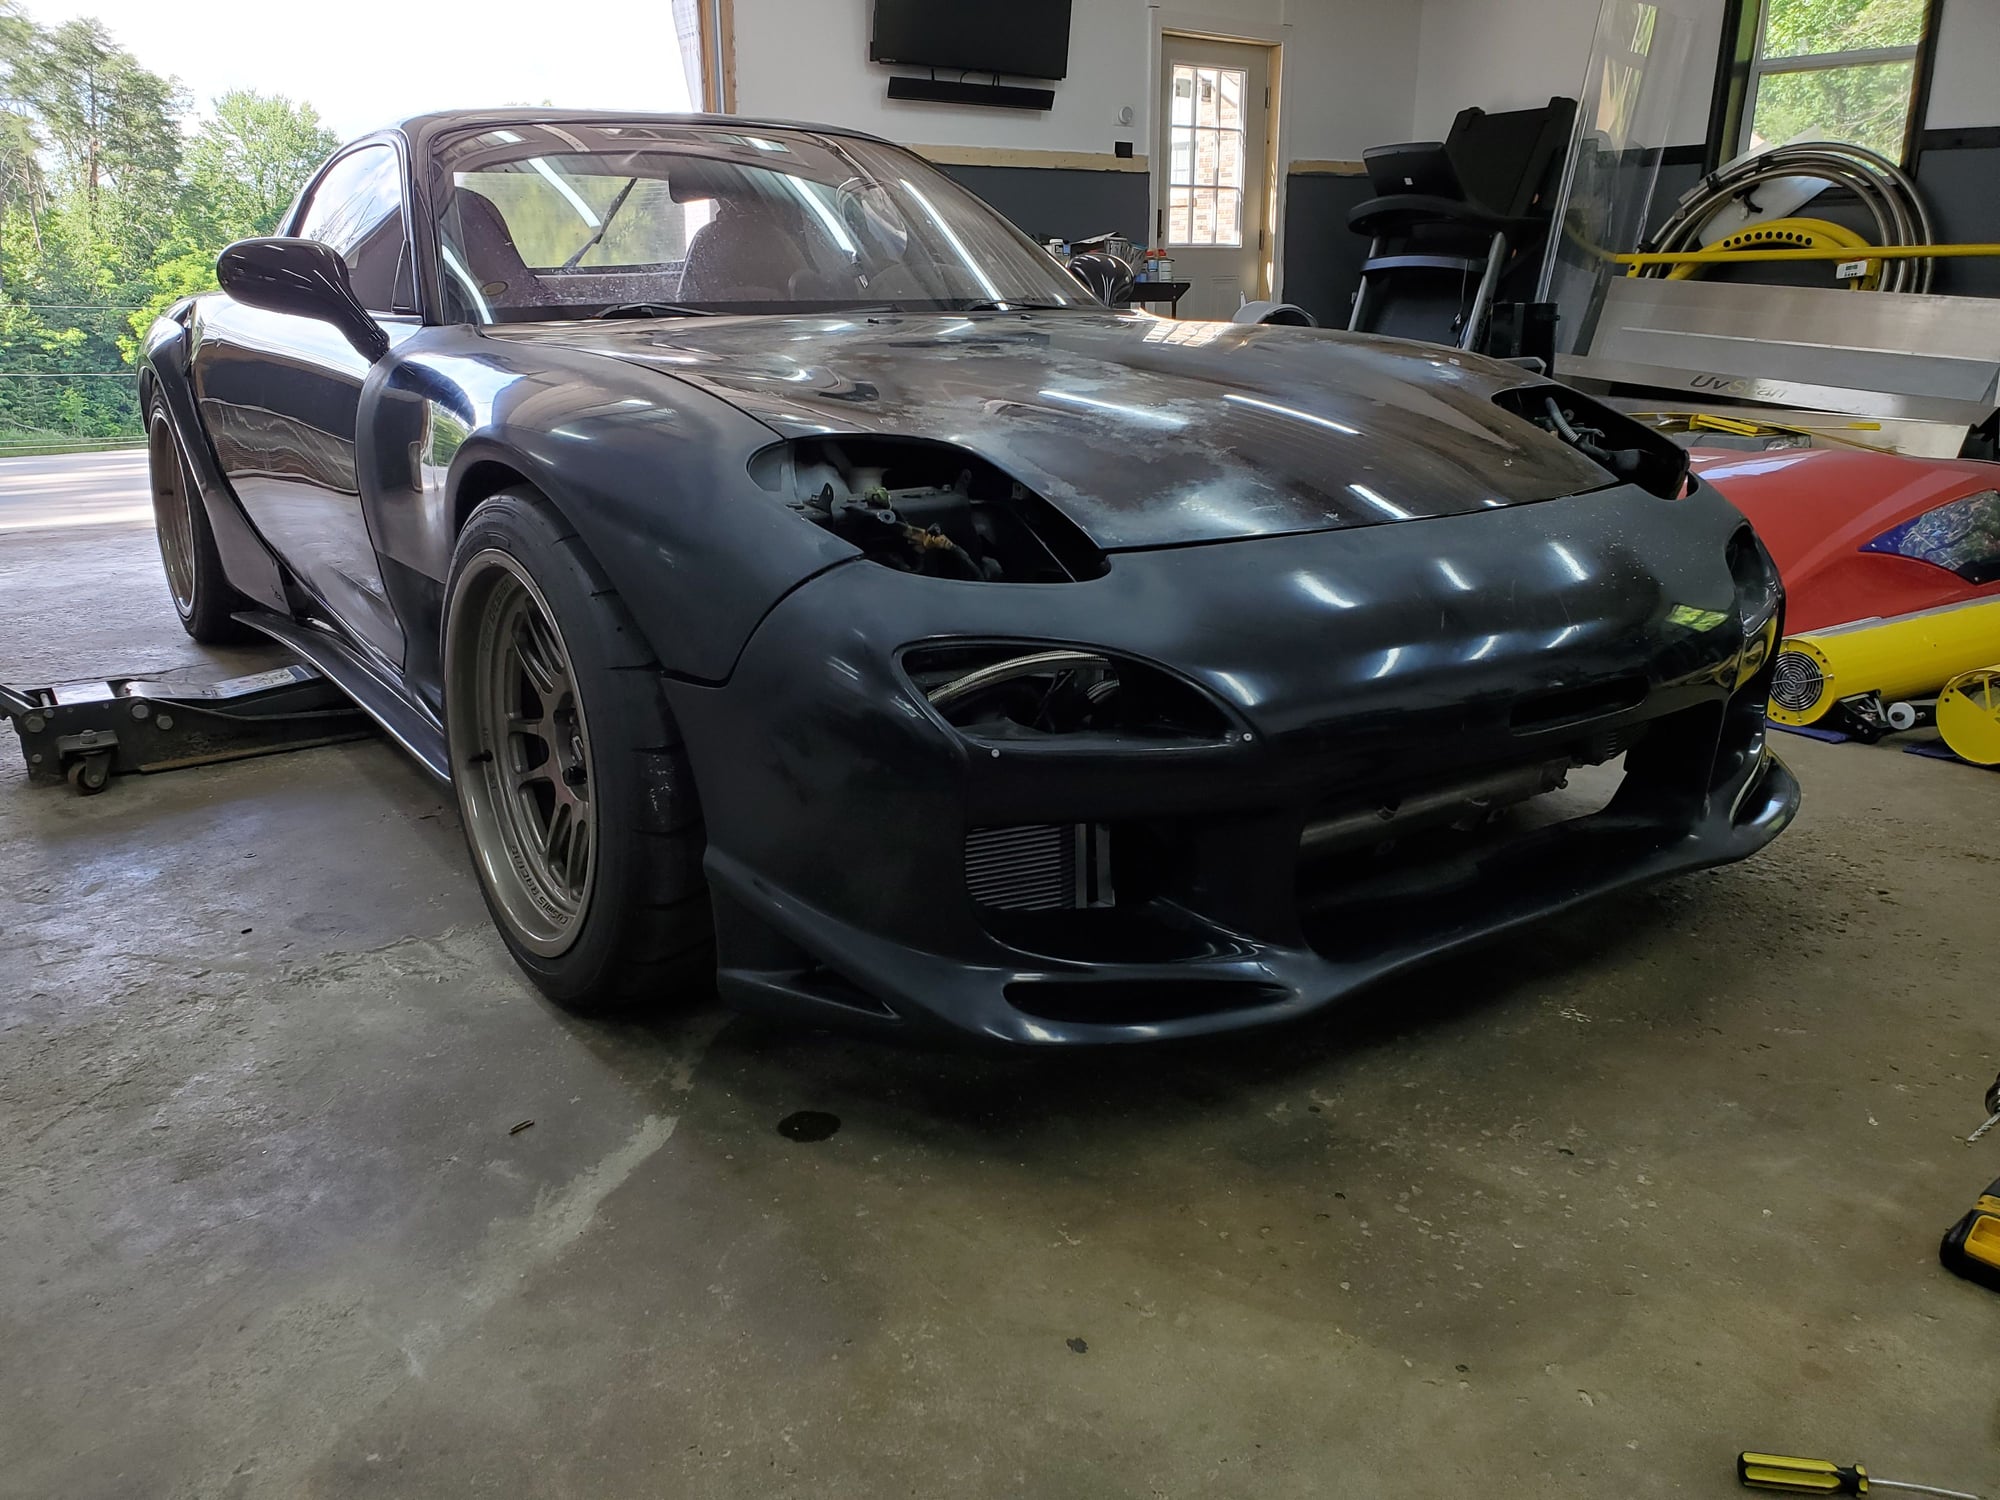 Exterior Body Parts - Shine Auto Feed style bumper, front fenders, rear over fenders and carbon fiber side - New - 1993 to 1994 Mazda RX-7 - Louisville, KY 40118, United States